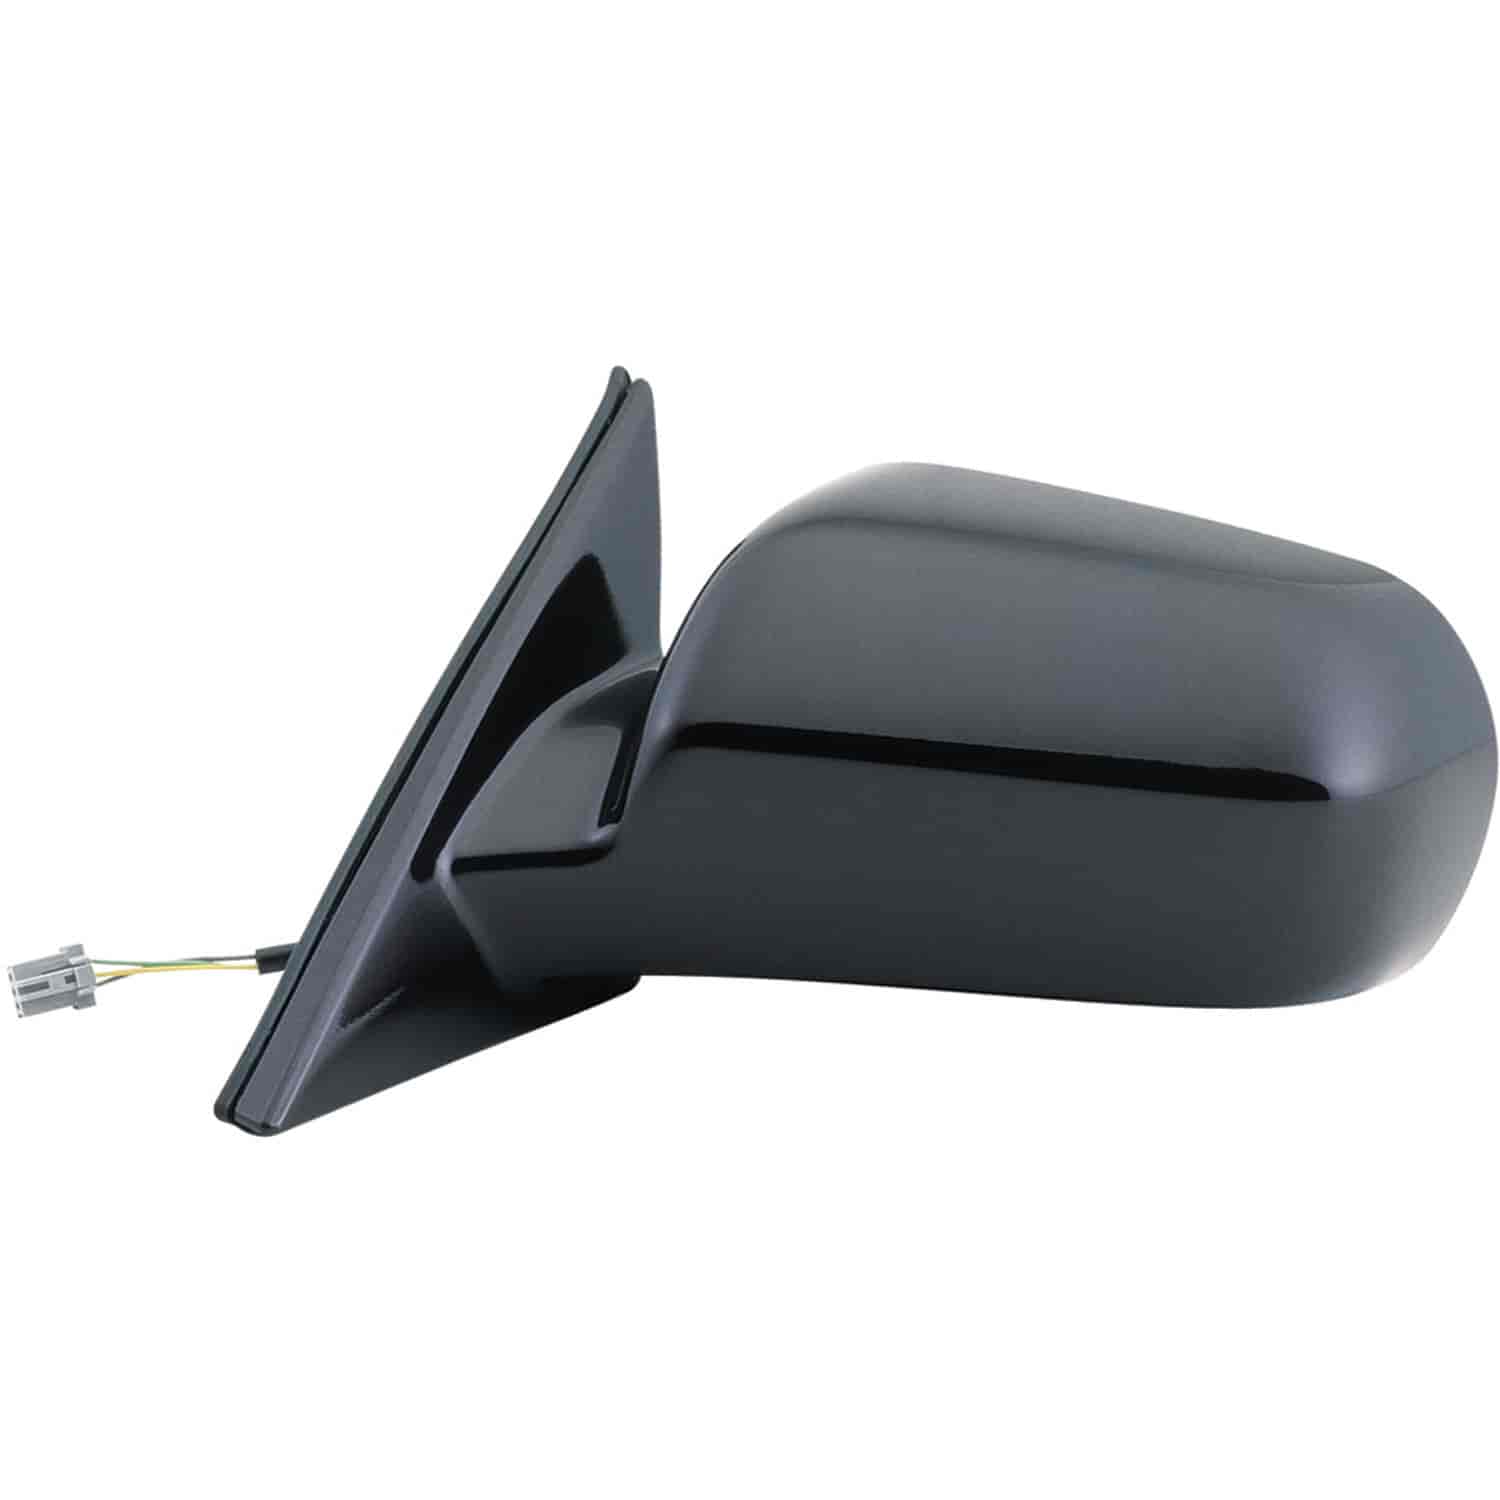 OEM Style Replacement mirror for 98-02 Honda Accord Sedan US built driver side mirror tested to fit